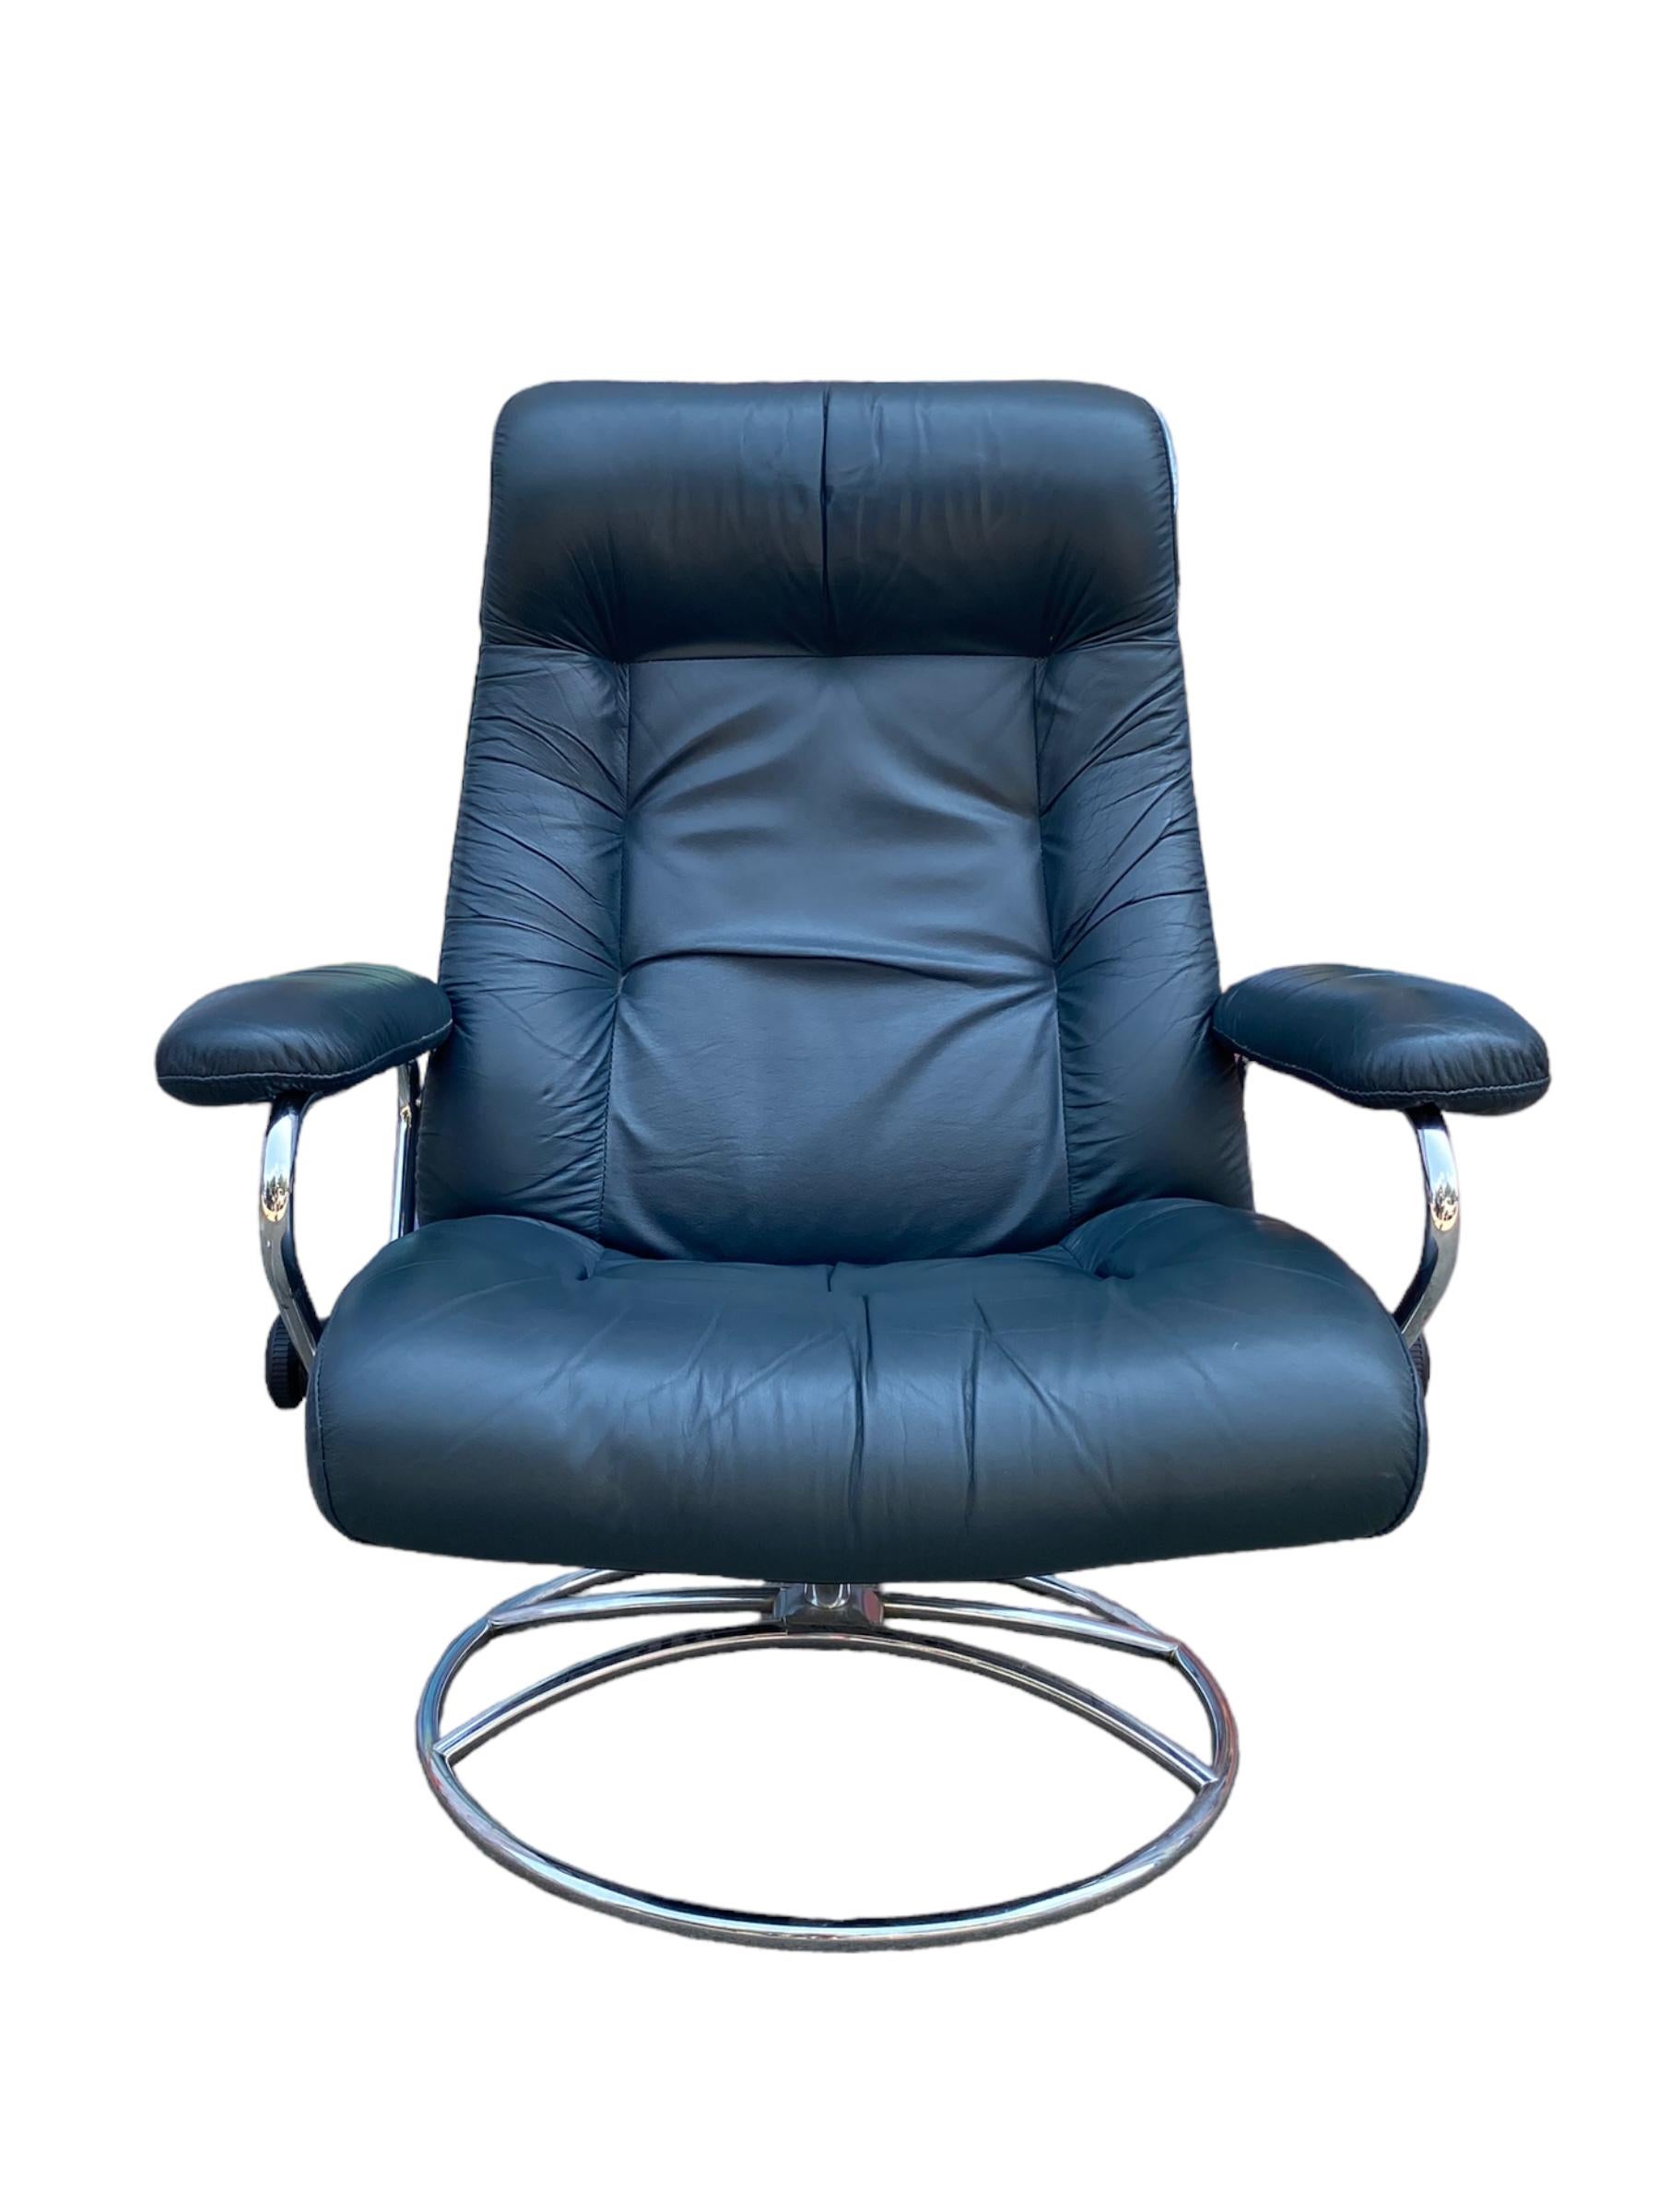 navy blue leather recliner chair